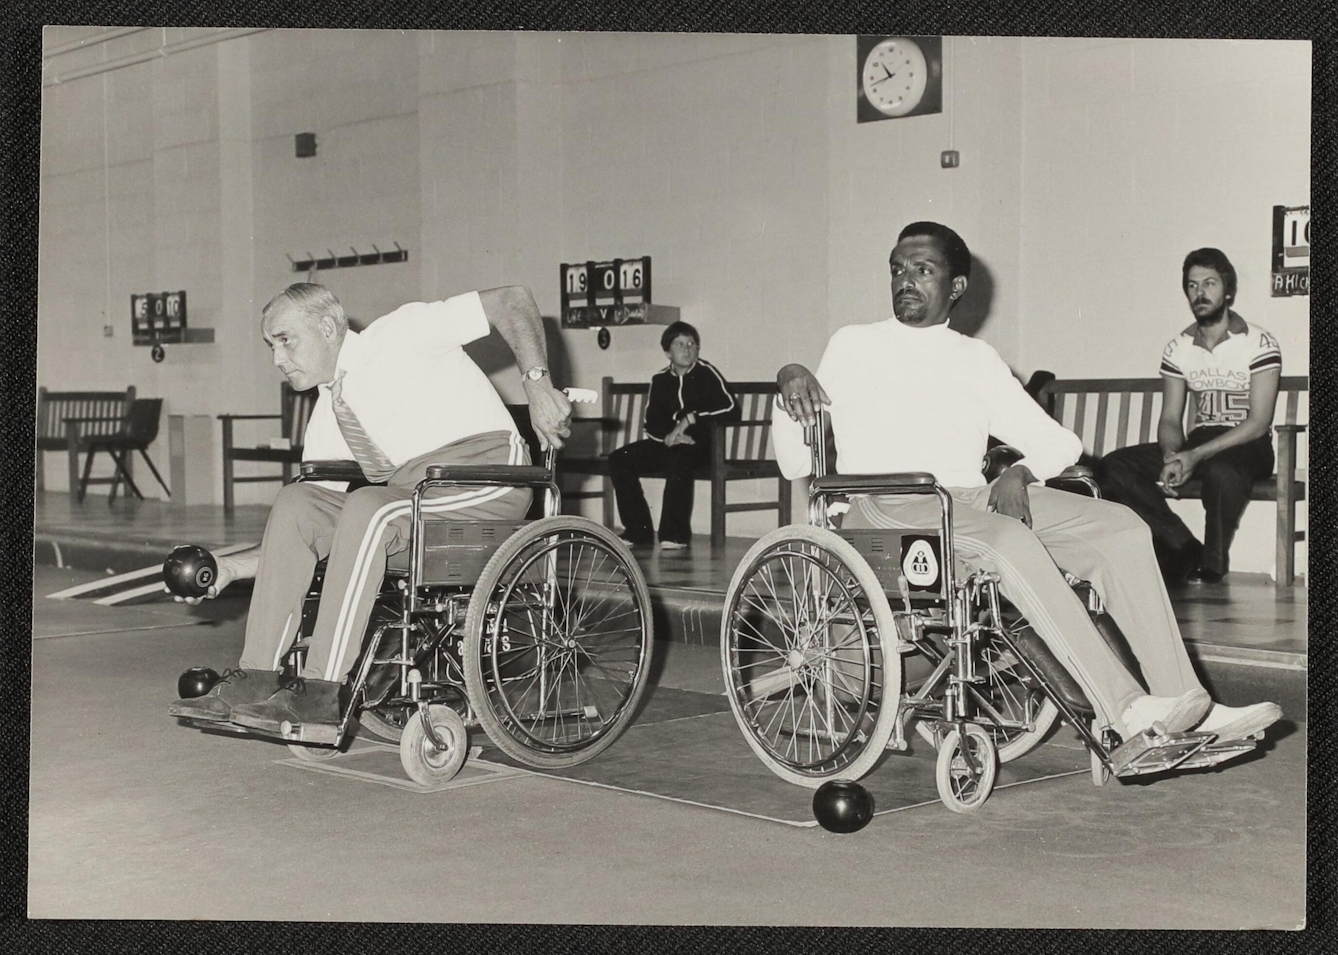 Black and white photograph showing two men playing wheelchair skittles. On the left, a white man leans down, gripping his wheelchair for balance using his left arm and reaching forward with a black skittle in his right hand, about to throw it. To his right sits a black man with his wheelchair pointing away from the throwing man, who is leaning around in his chair to watch. Behind are benches for spectators, one of whom is a bearded man in a Dallas Cowboys shirt holding a cigarette, and the other of which is a teenage boy in a dark tracksuit with white stripes running down the sleeves and front. A scoreboard in the background appears to indicate the score is 19:16. 